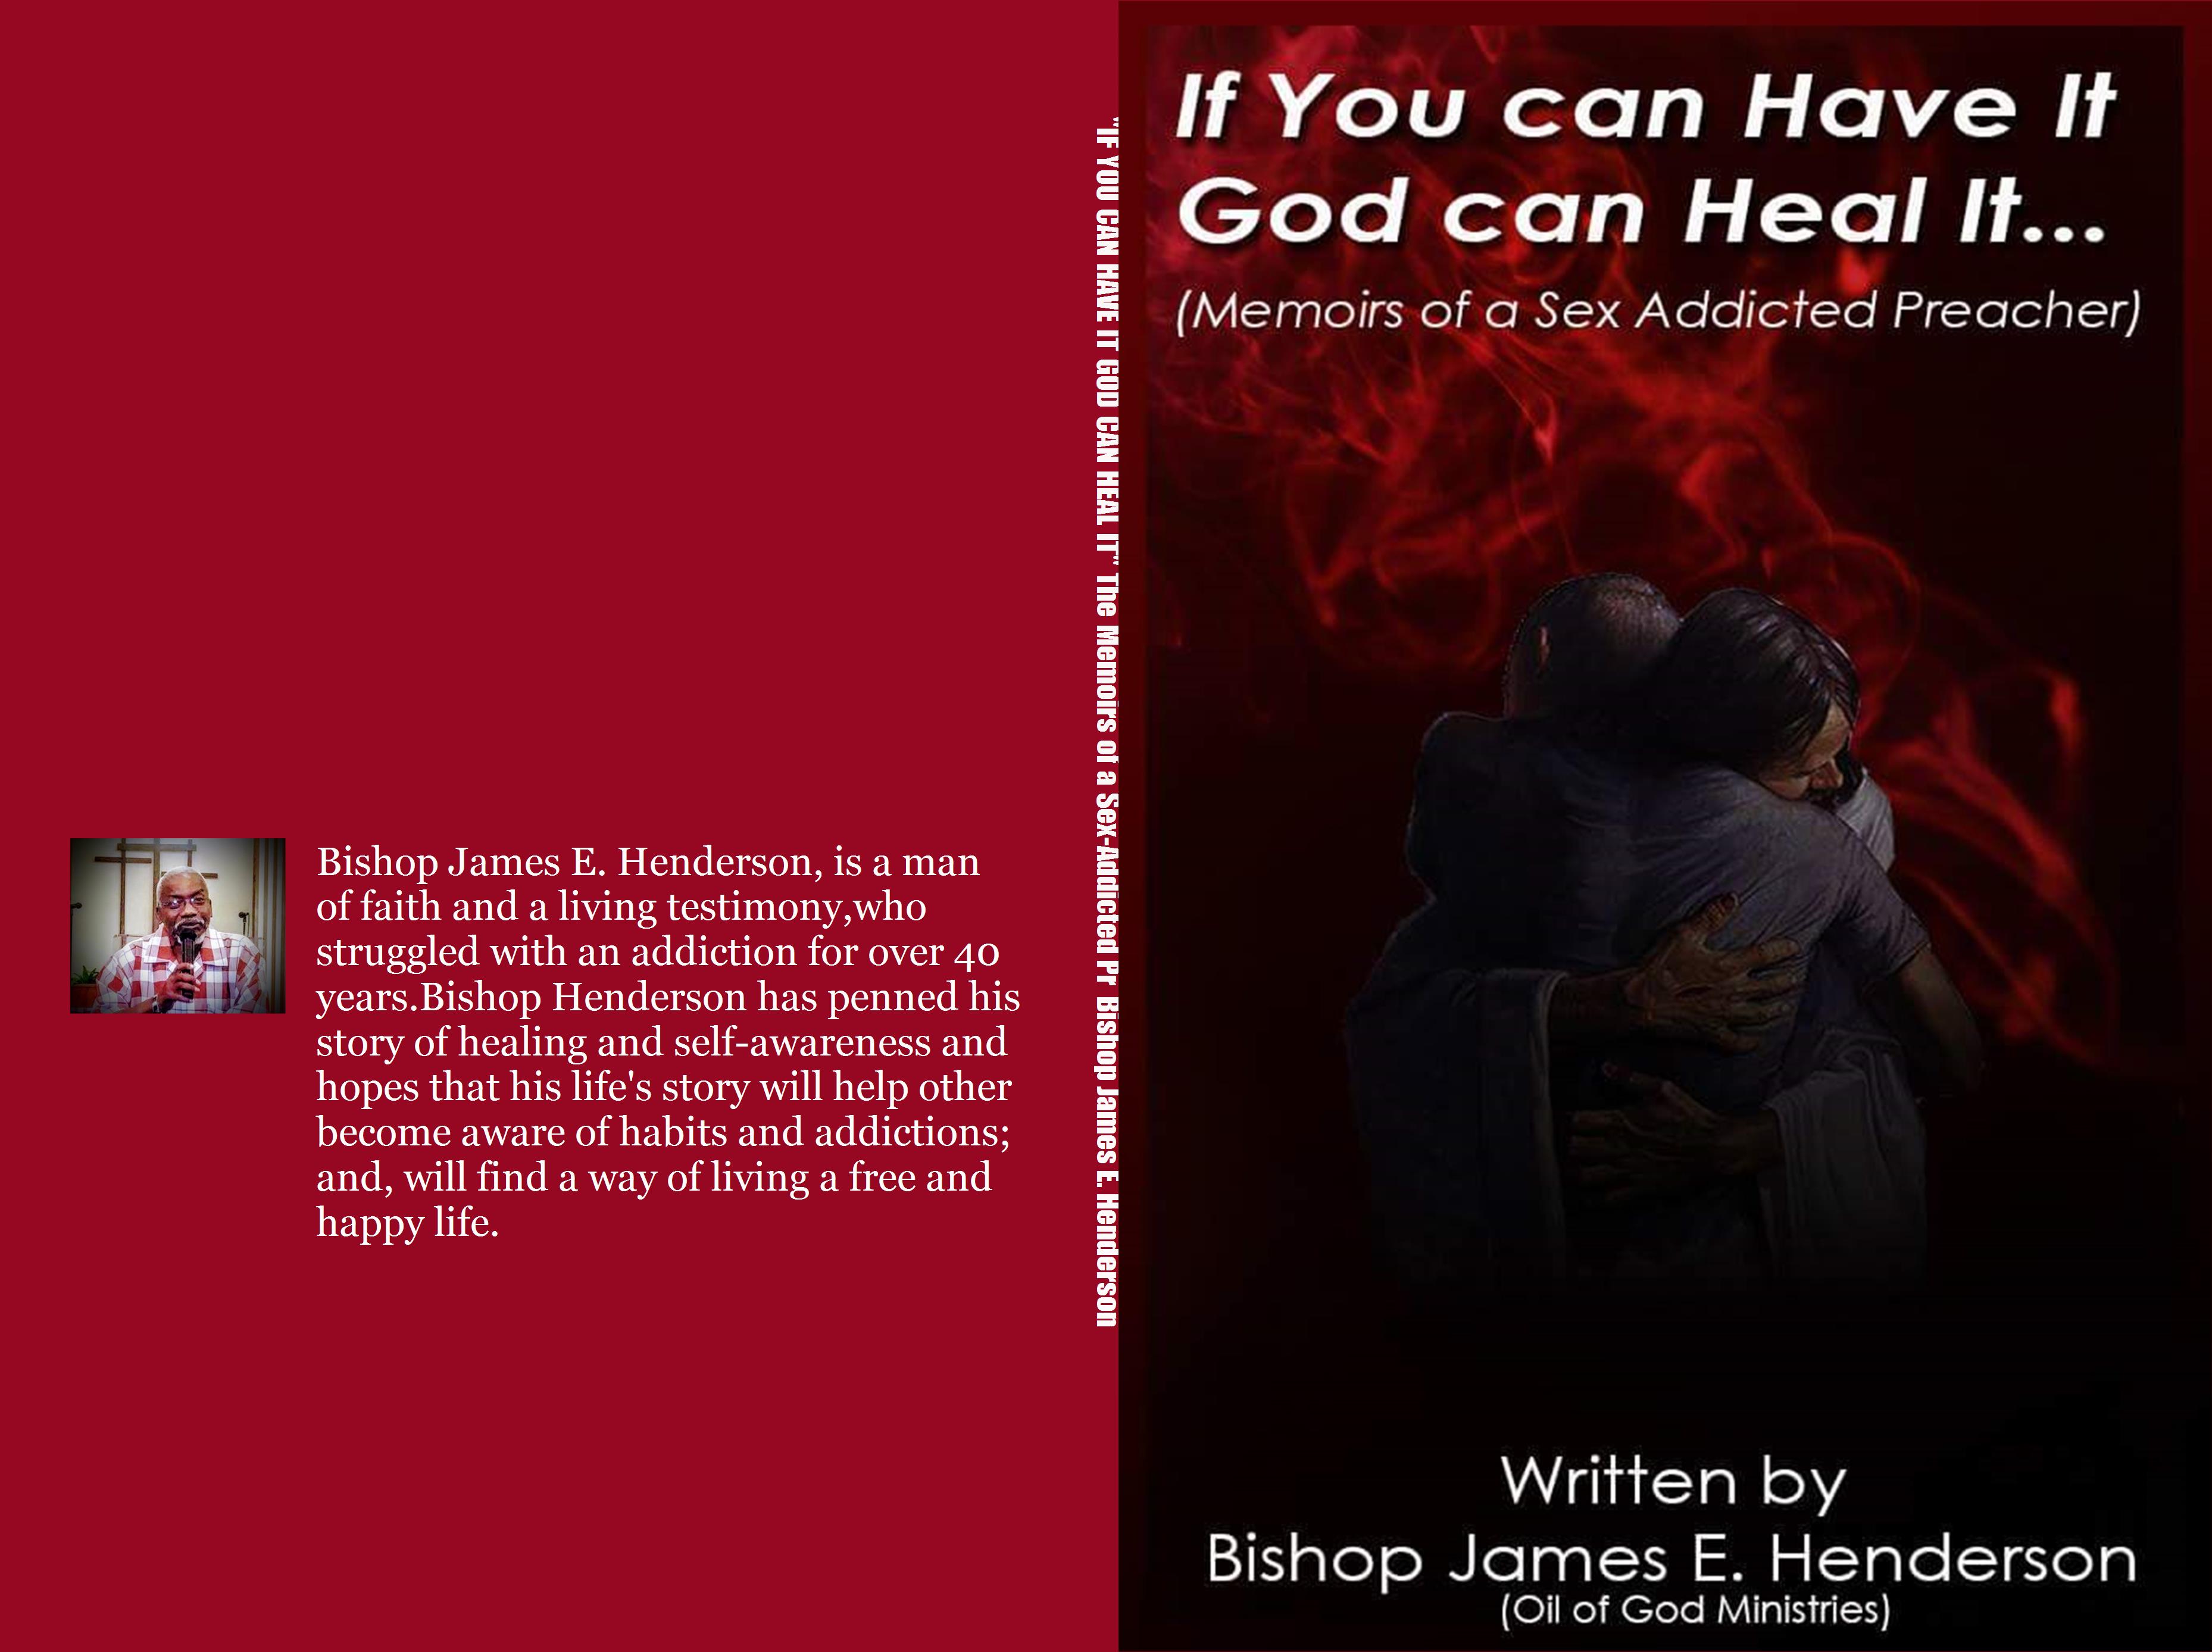 "IF YOU CAN HAVE IT GOD CAN HEAL IT" The Memoirs of a Sex-Addicted Preacher cover image